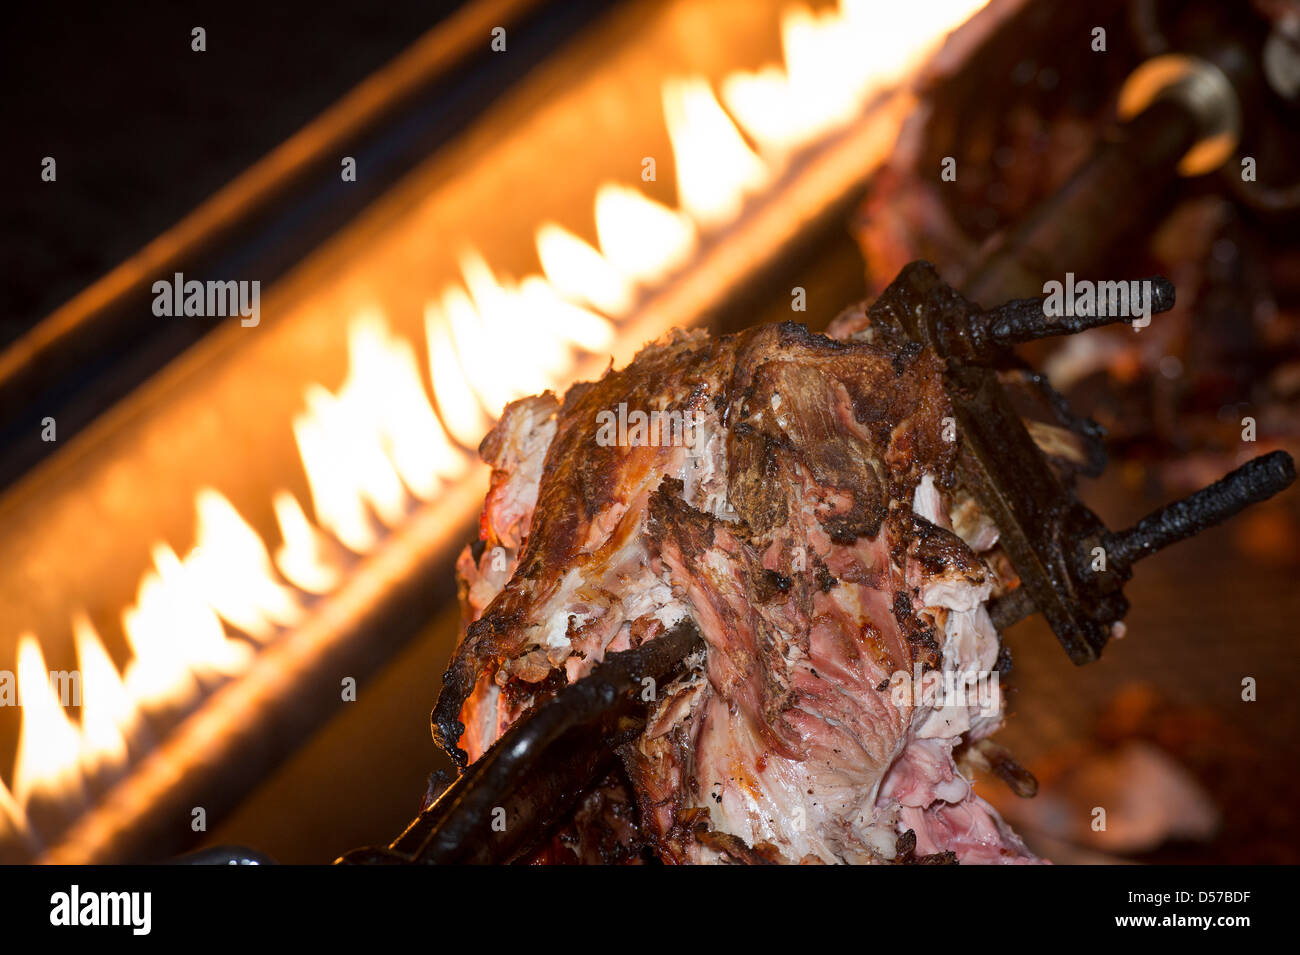 Remains of a hog roast being cooked on a spit. Stock Photo